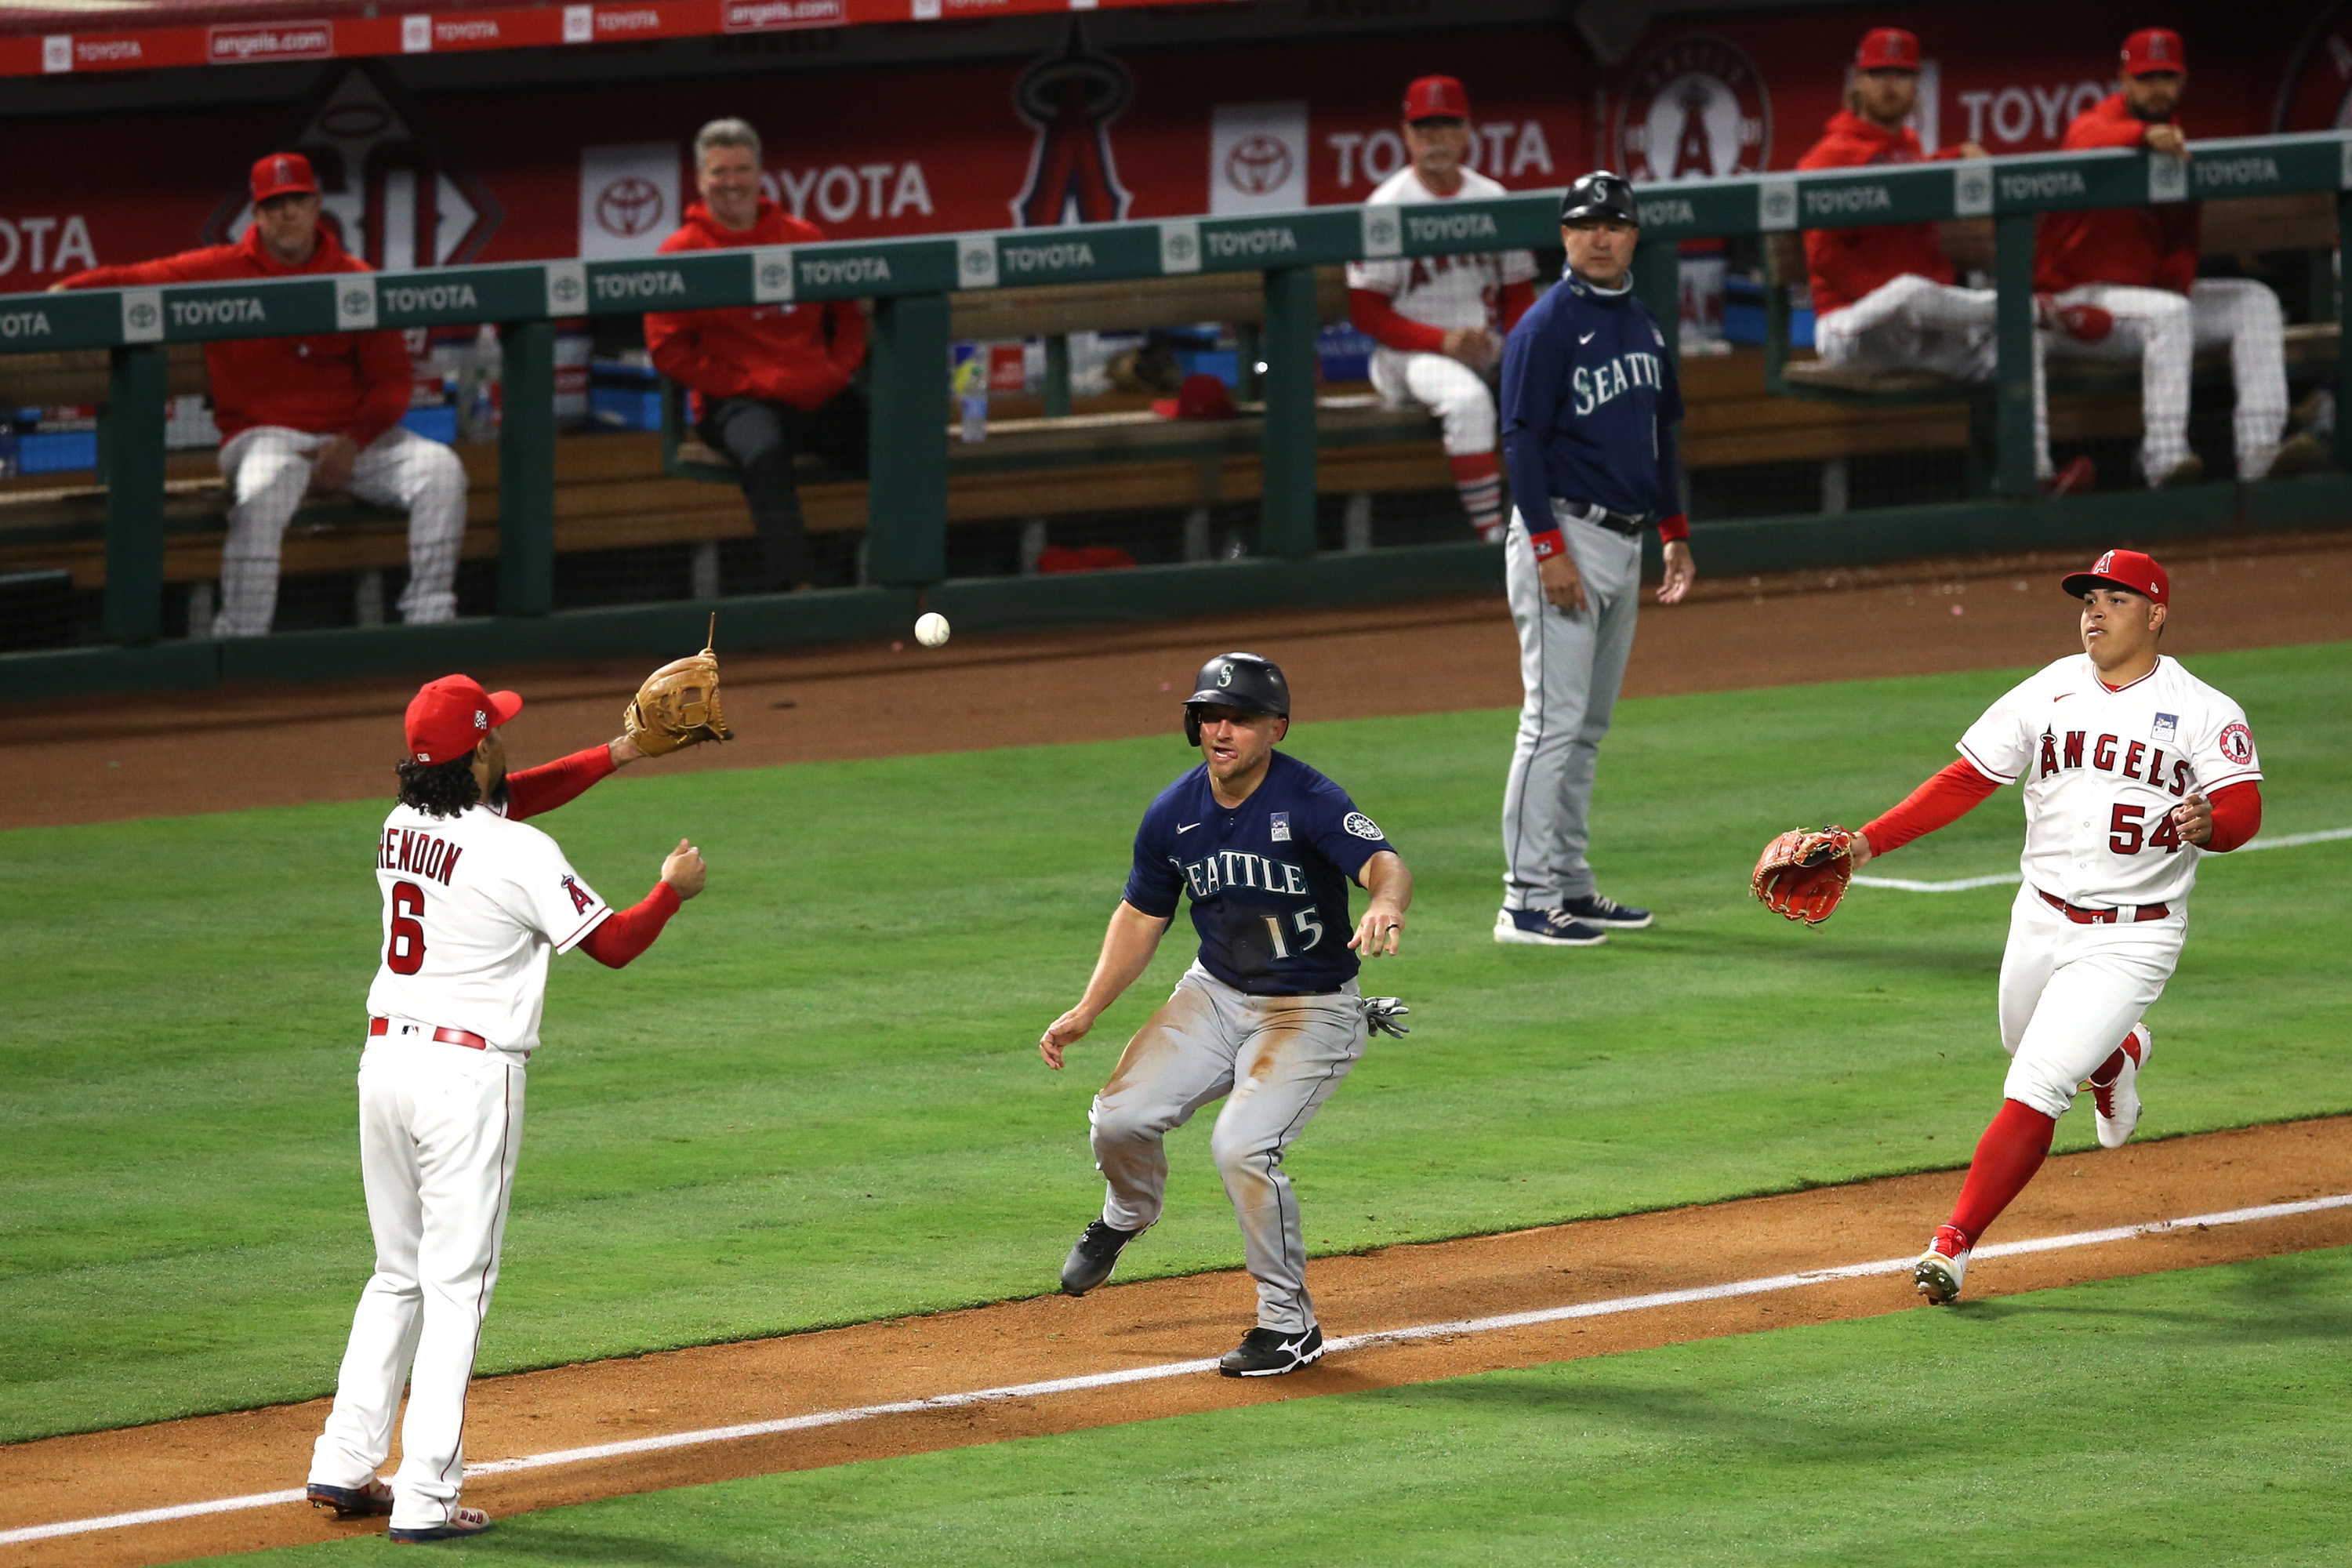 ANAHEIM, CALIFORNIA - JUNE 03: Kyle Seager #15 of the Seattle Mariners is caught in a rundown between Anthony Rendon #6 and Jose Suarez #54 of the Los Angeles Angels after stealing third base in the fifth inning at Angel Stadium of Anaheim on June 03, 2021 in Anaheim, California.